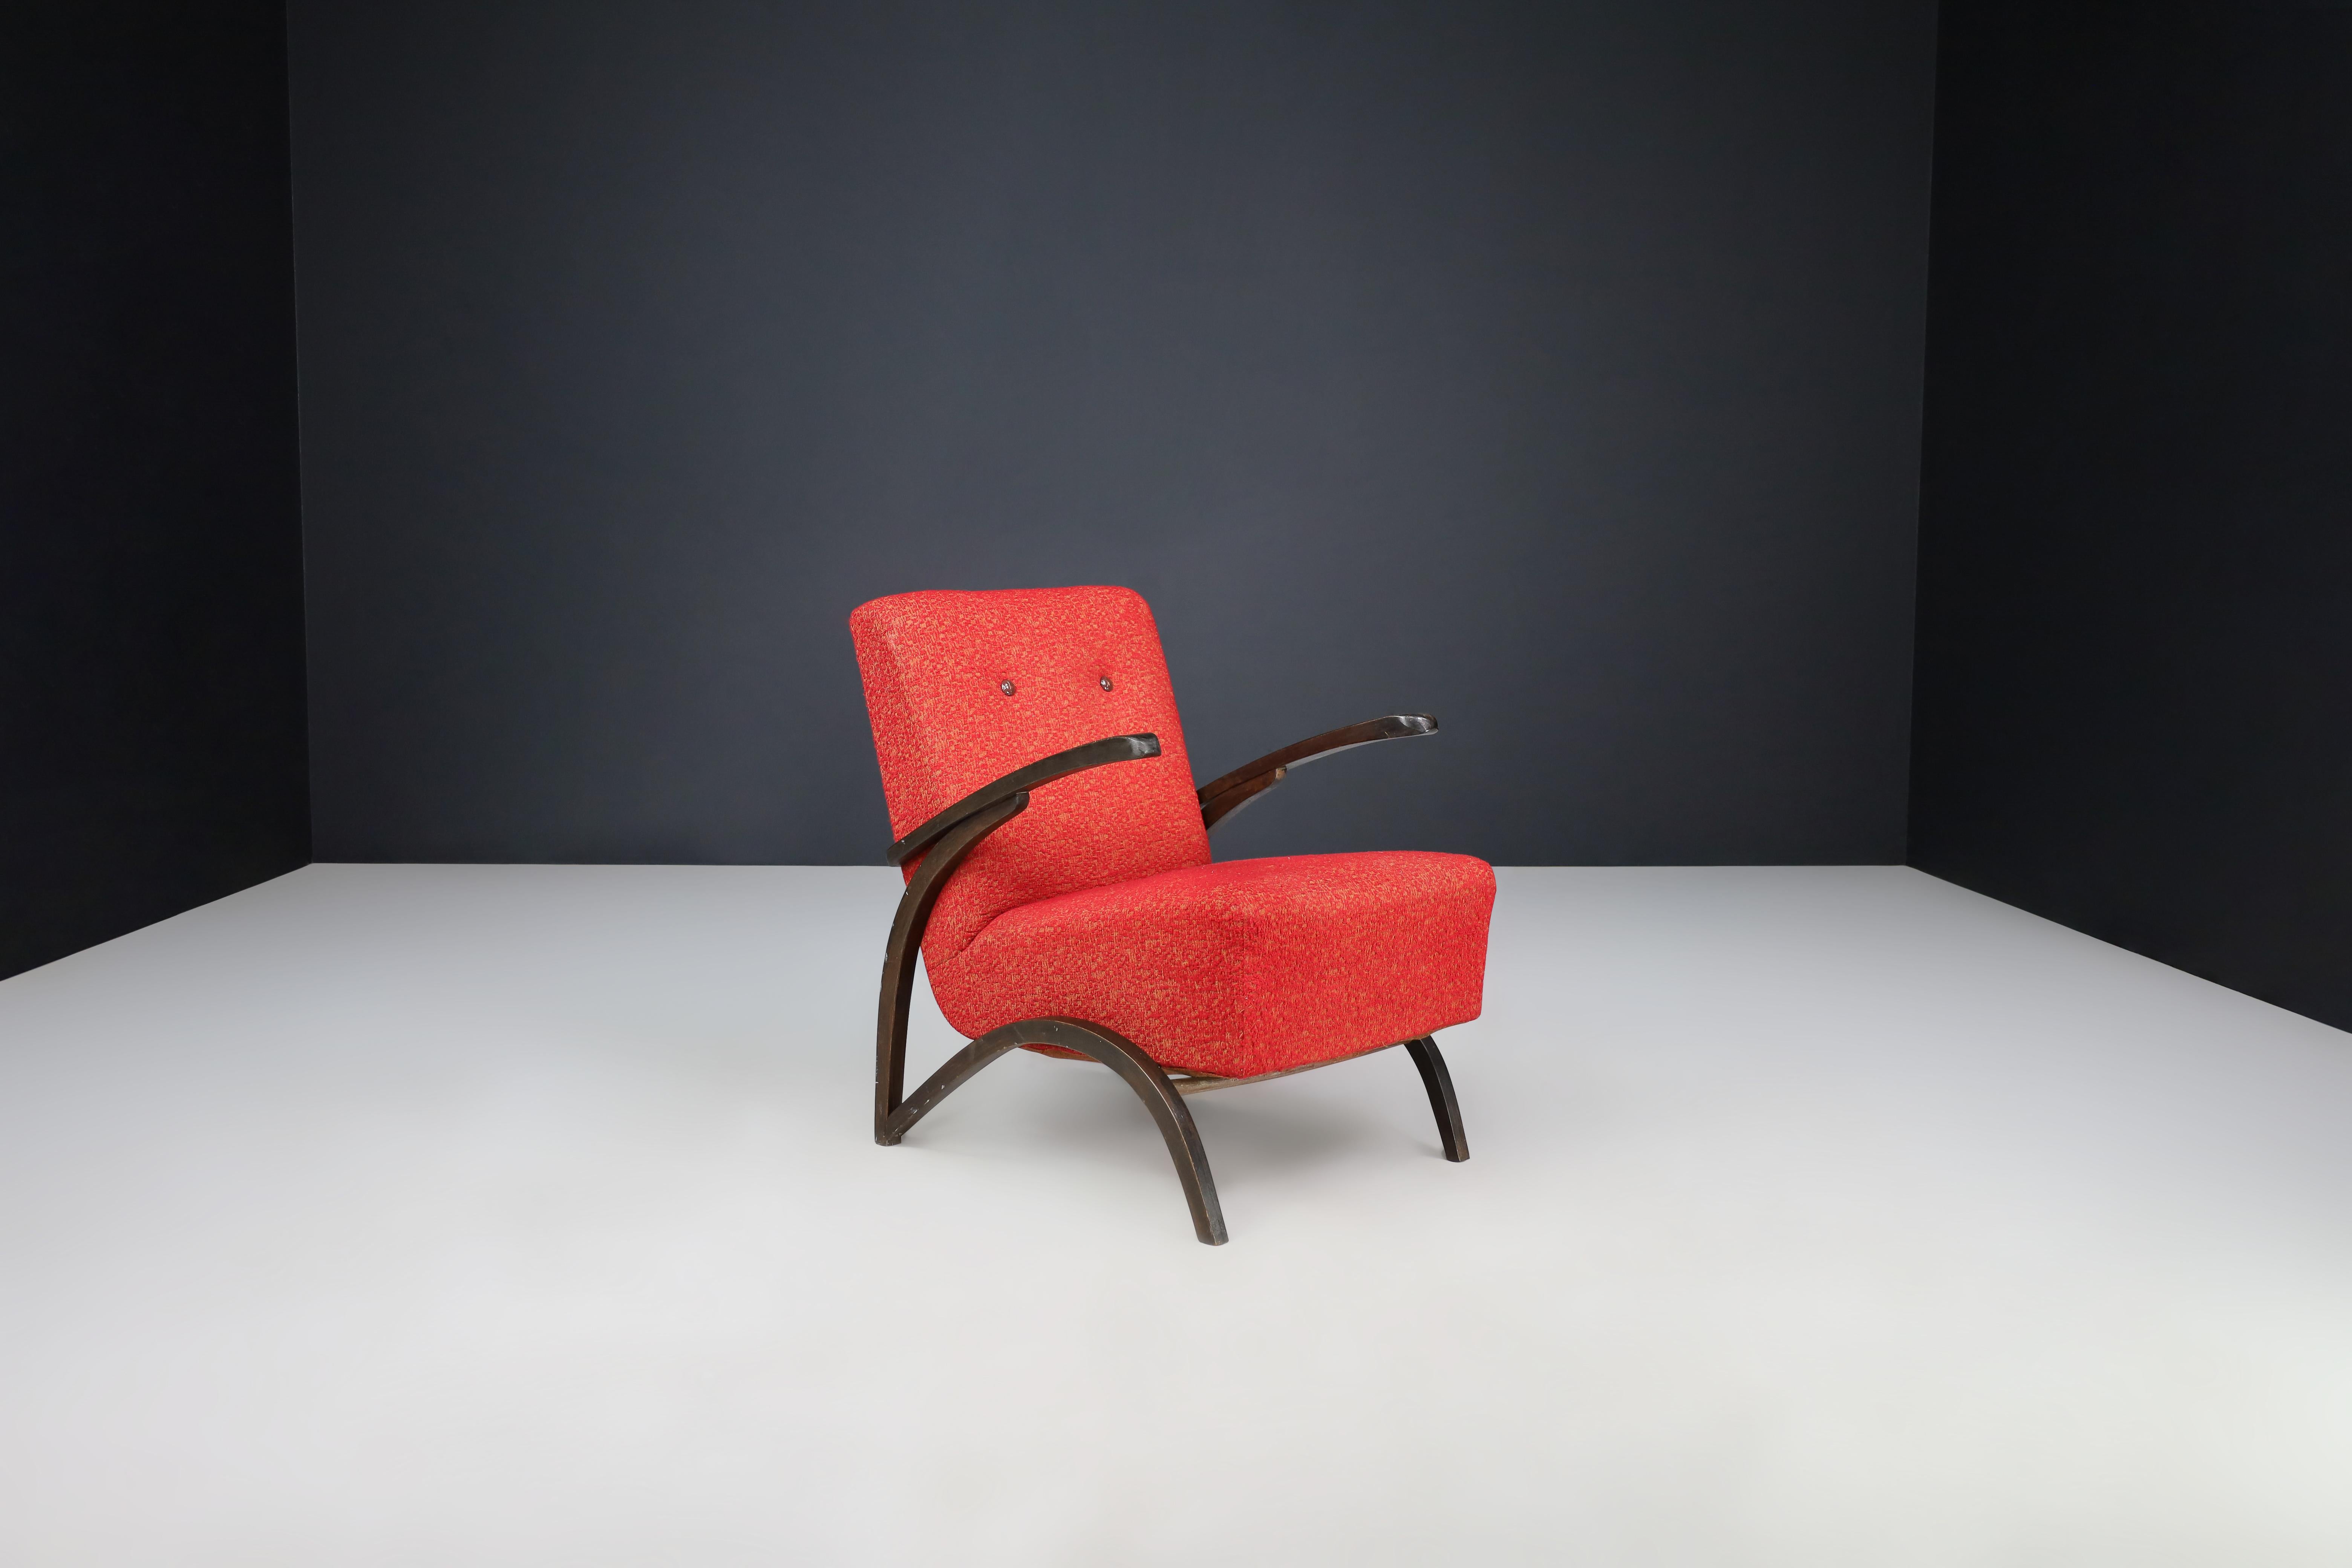 Jindrich Halabala Lounge Chair in Original Red Upholstery Czech Republic 1930.

This elegant lounge chair, designed by Jindrich Halabala and produced by Thonet in Czechia around 1930, is an exemplary representation of the midcentury design in